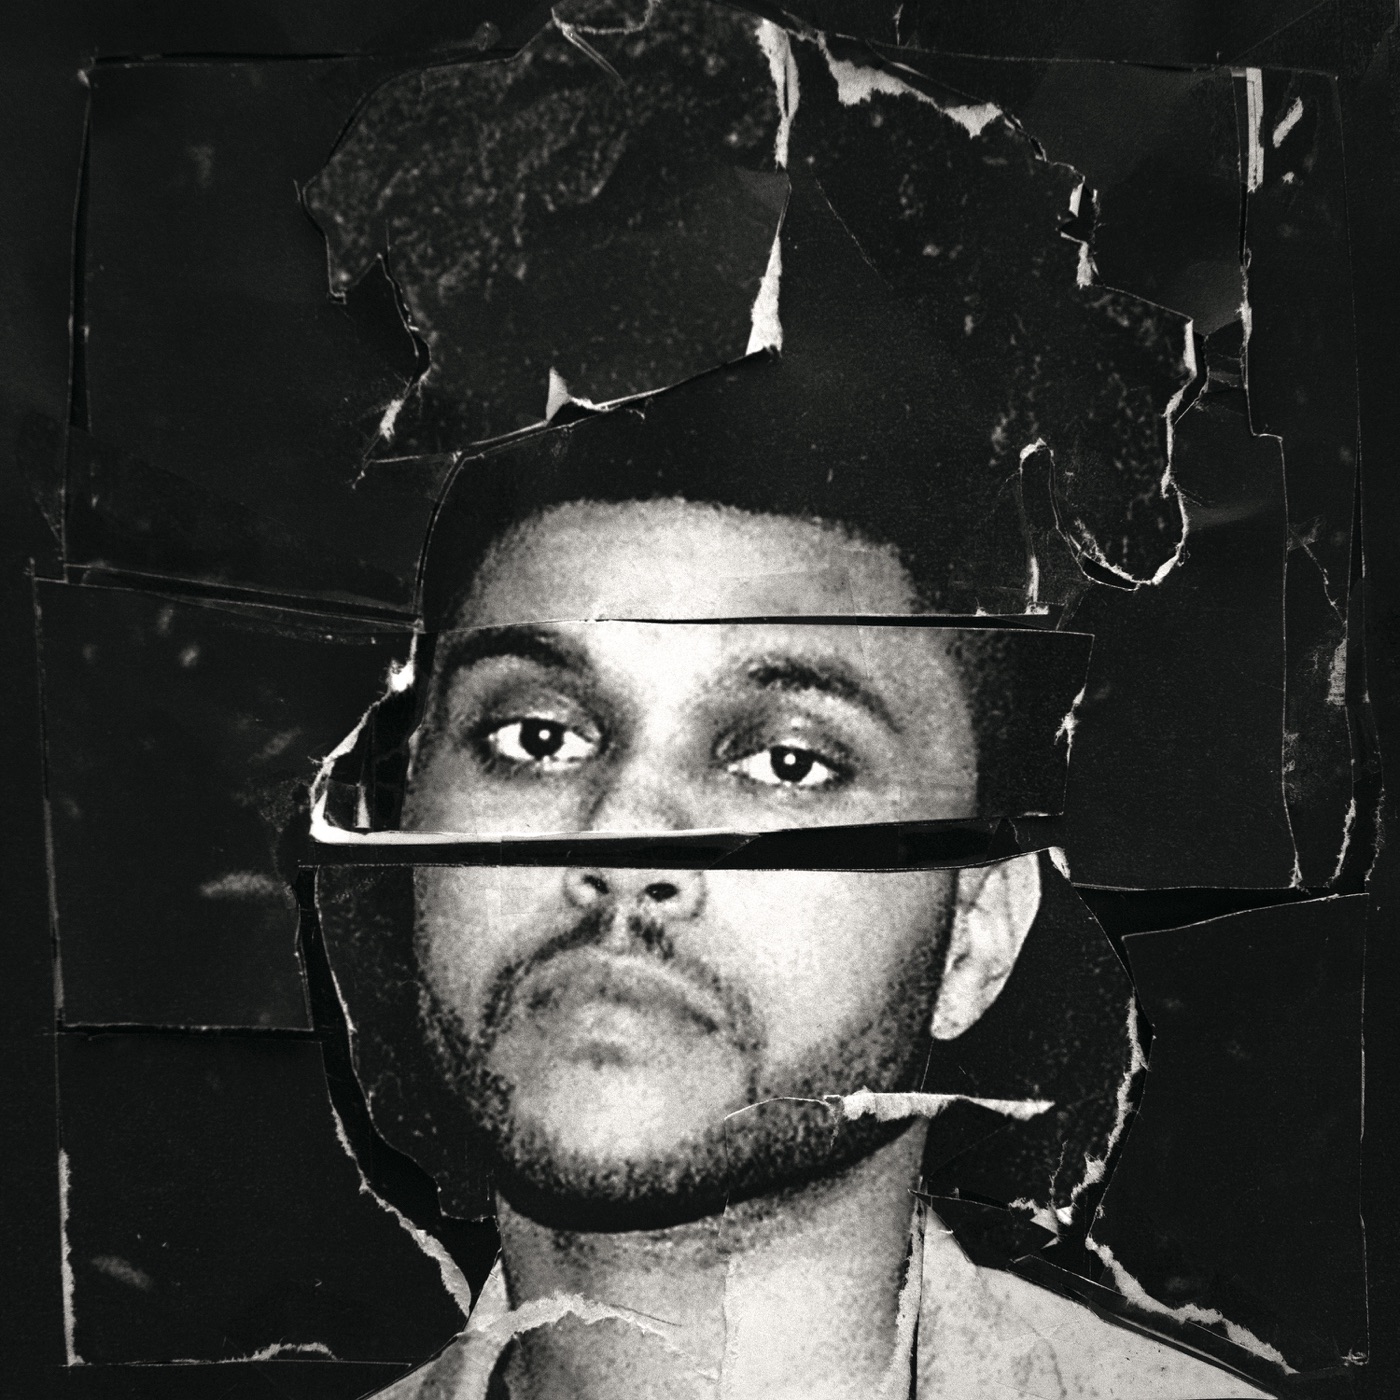 Beauty Behind The Madness by The Weeknd